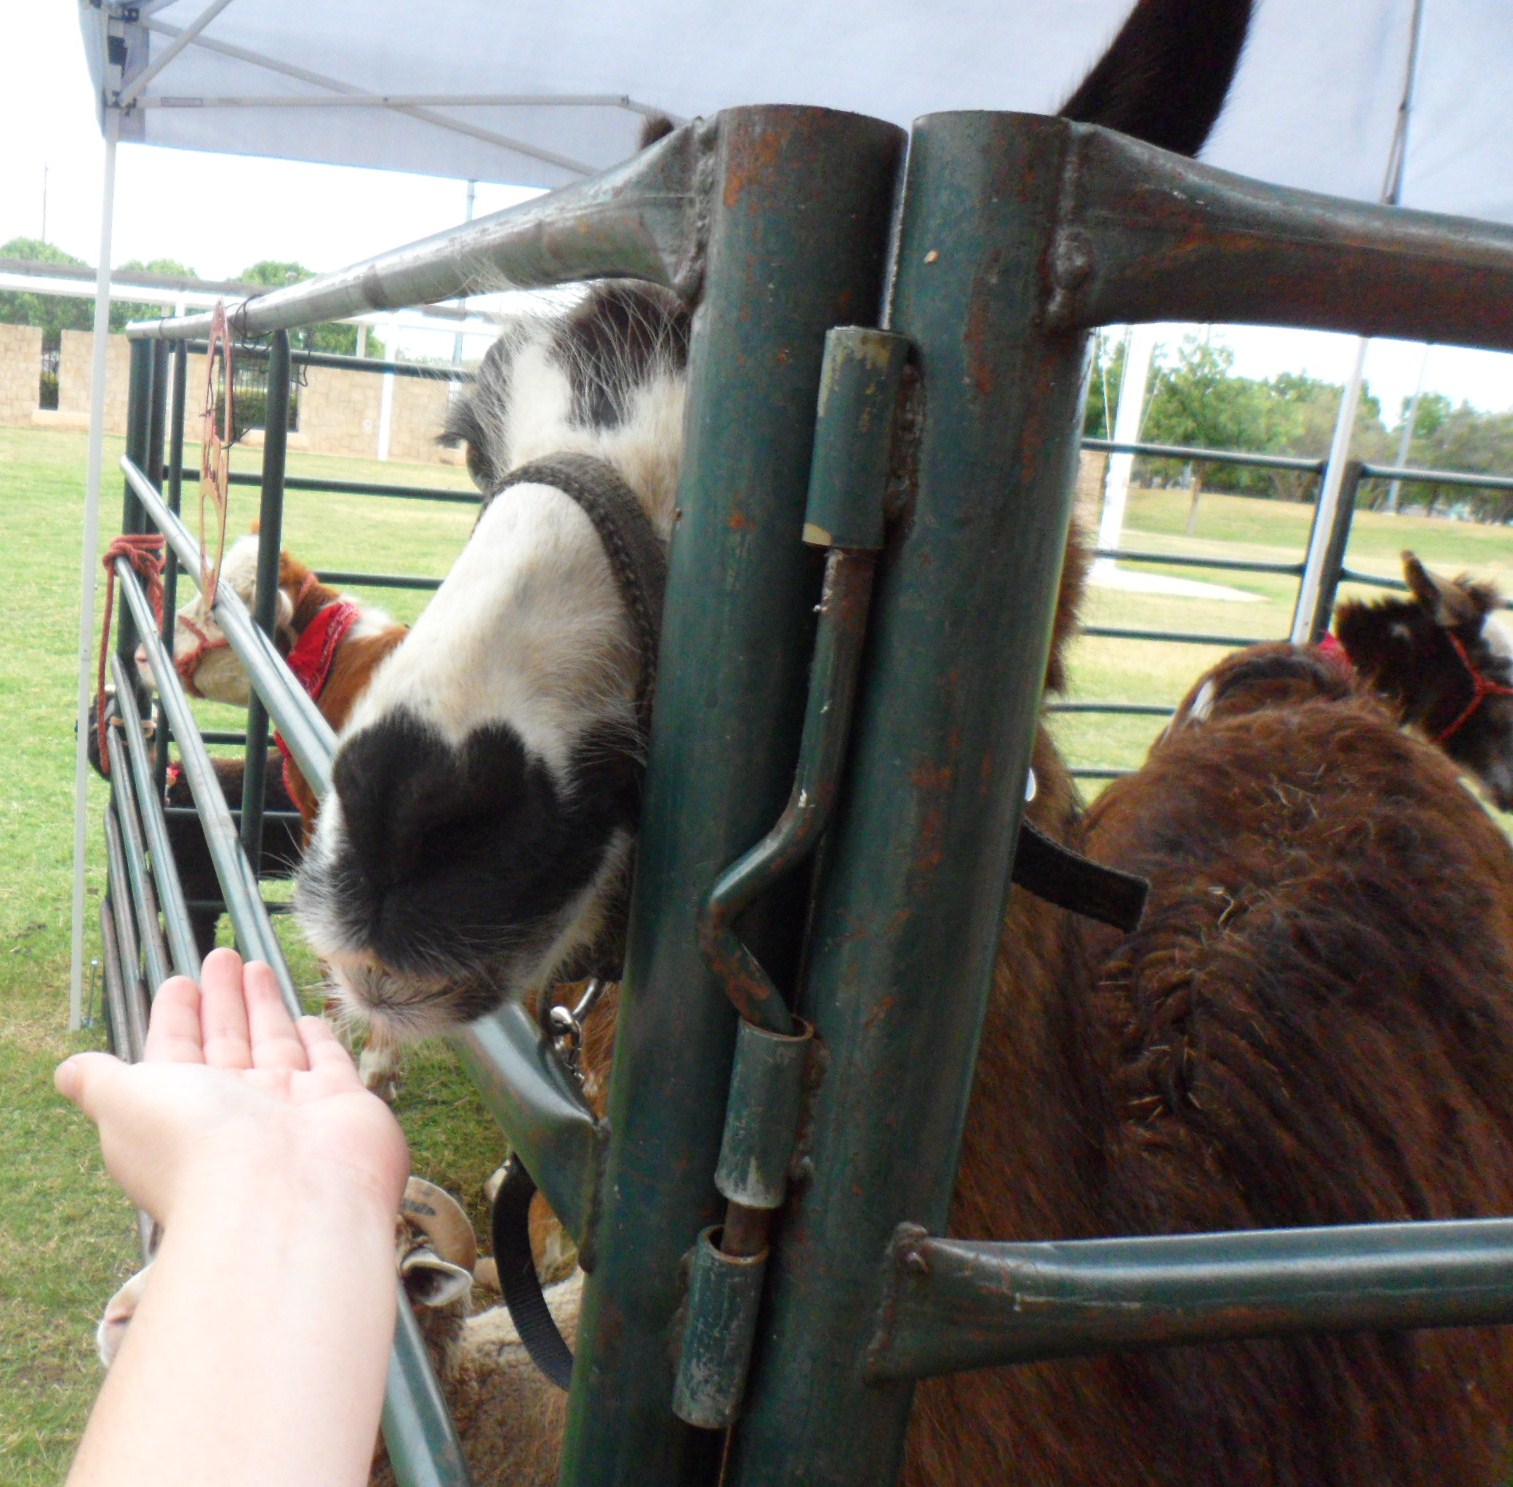 Me feeding the Llama, I actually ended up using all of JT's food because he was kind of scared and didn't want to feed them after all.